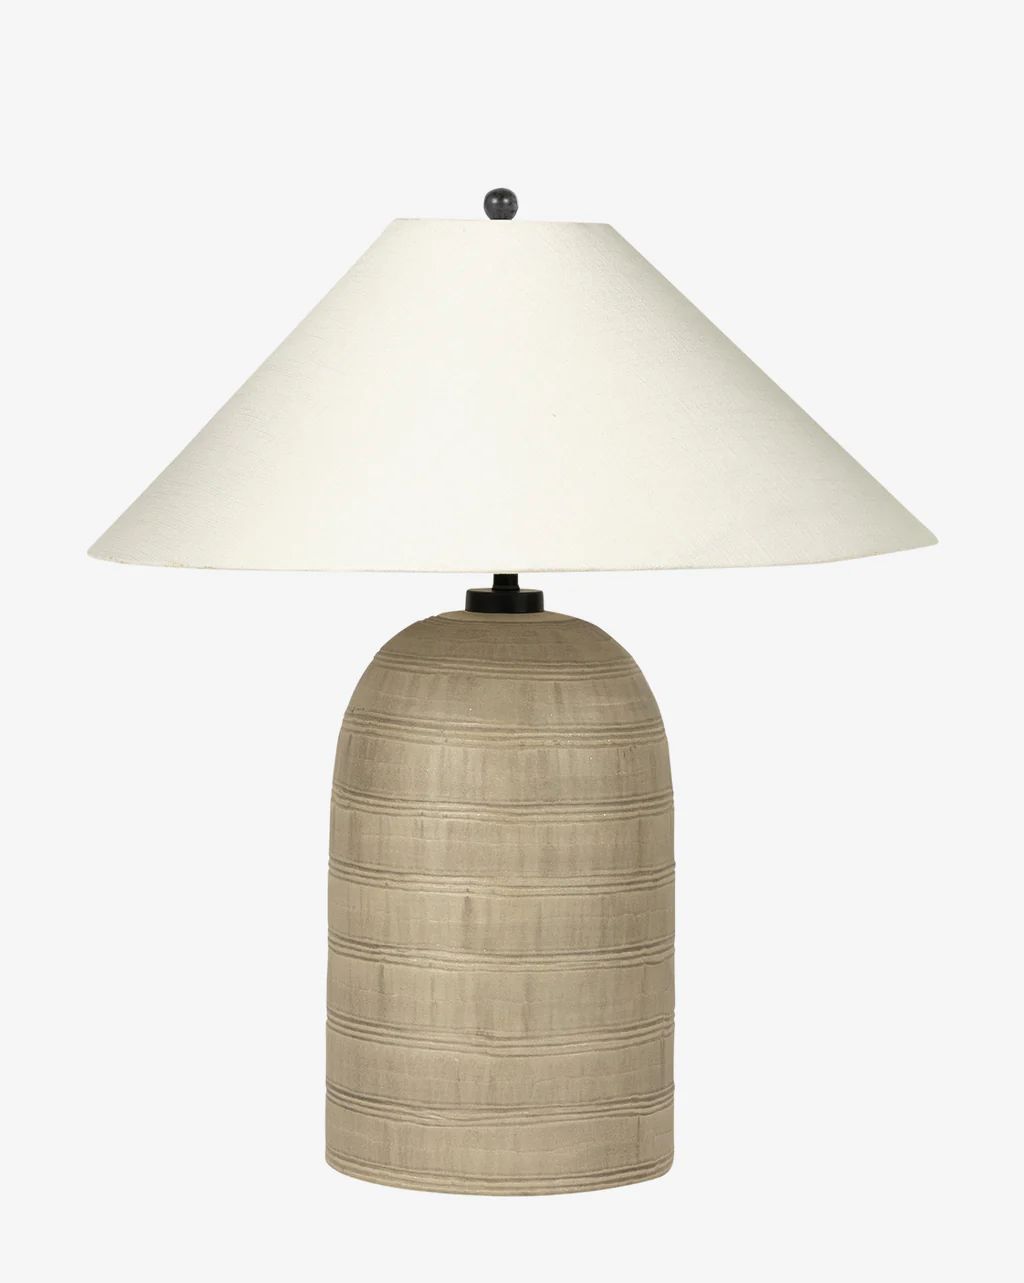 Brynner Table Lamp | McGee & Co.